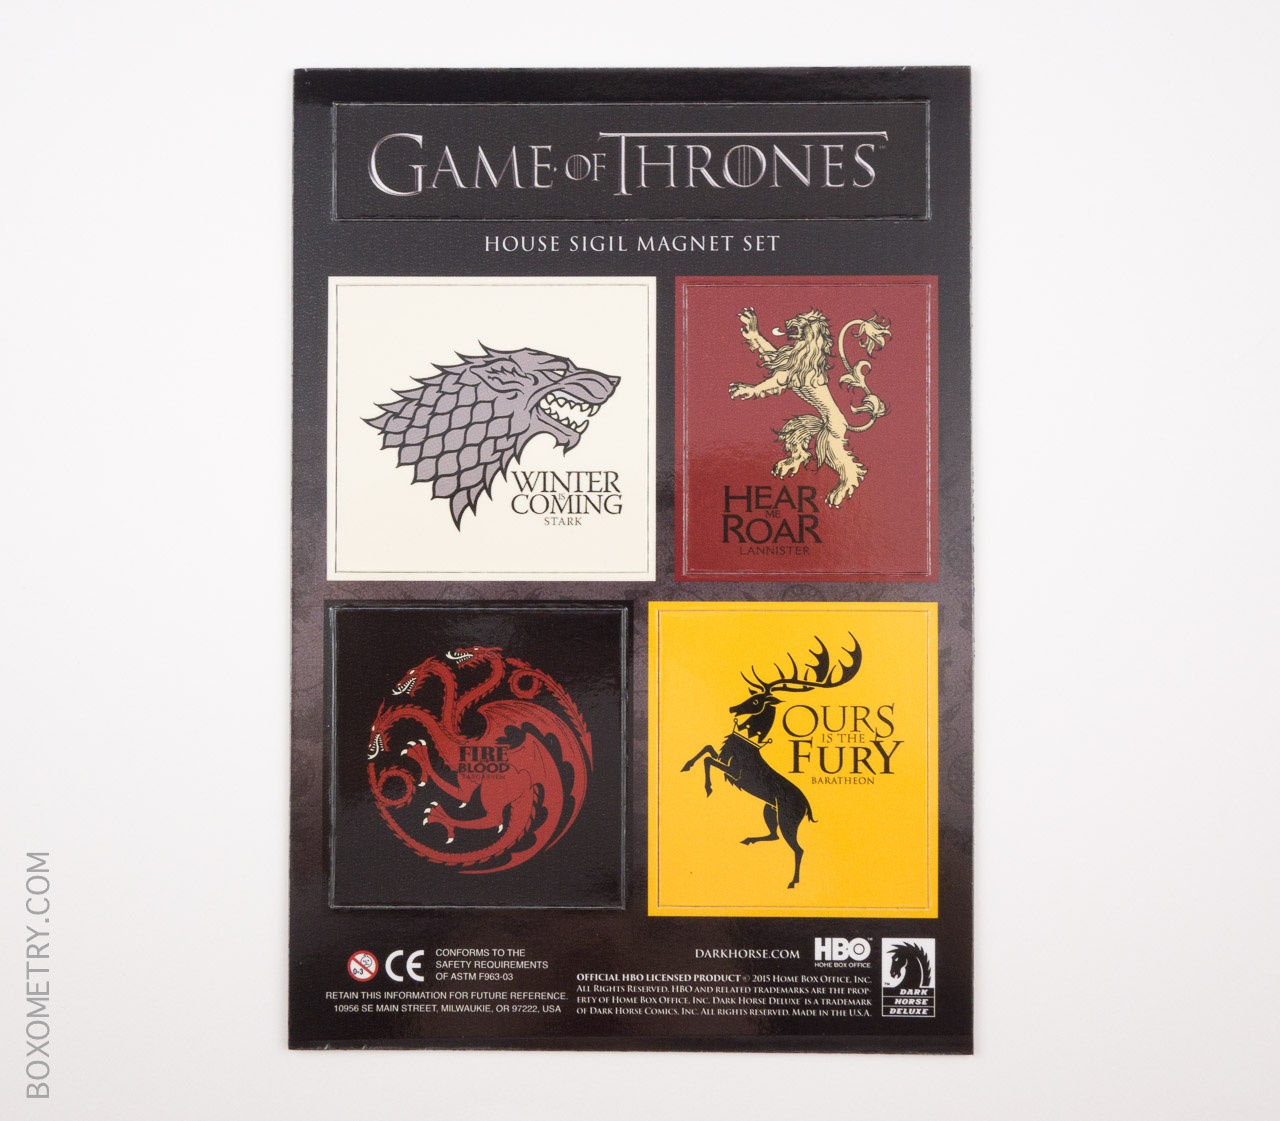 Loot Crate April 2015 Game of Thrones Magnet Set